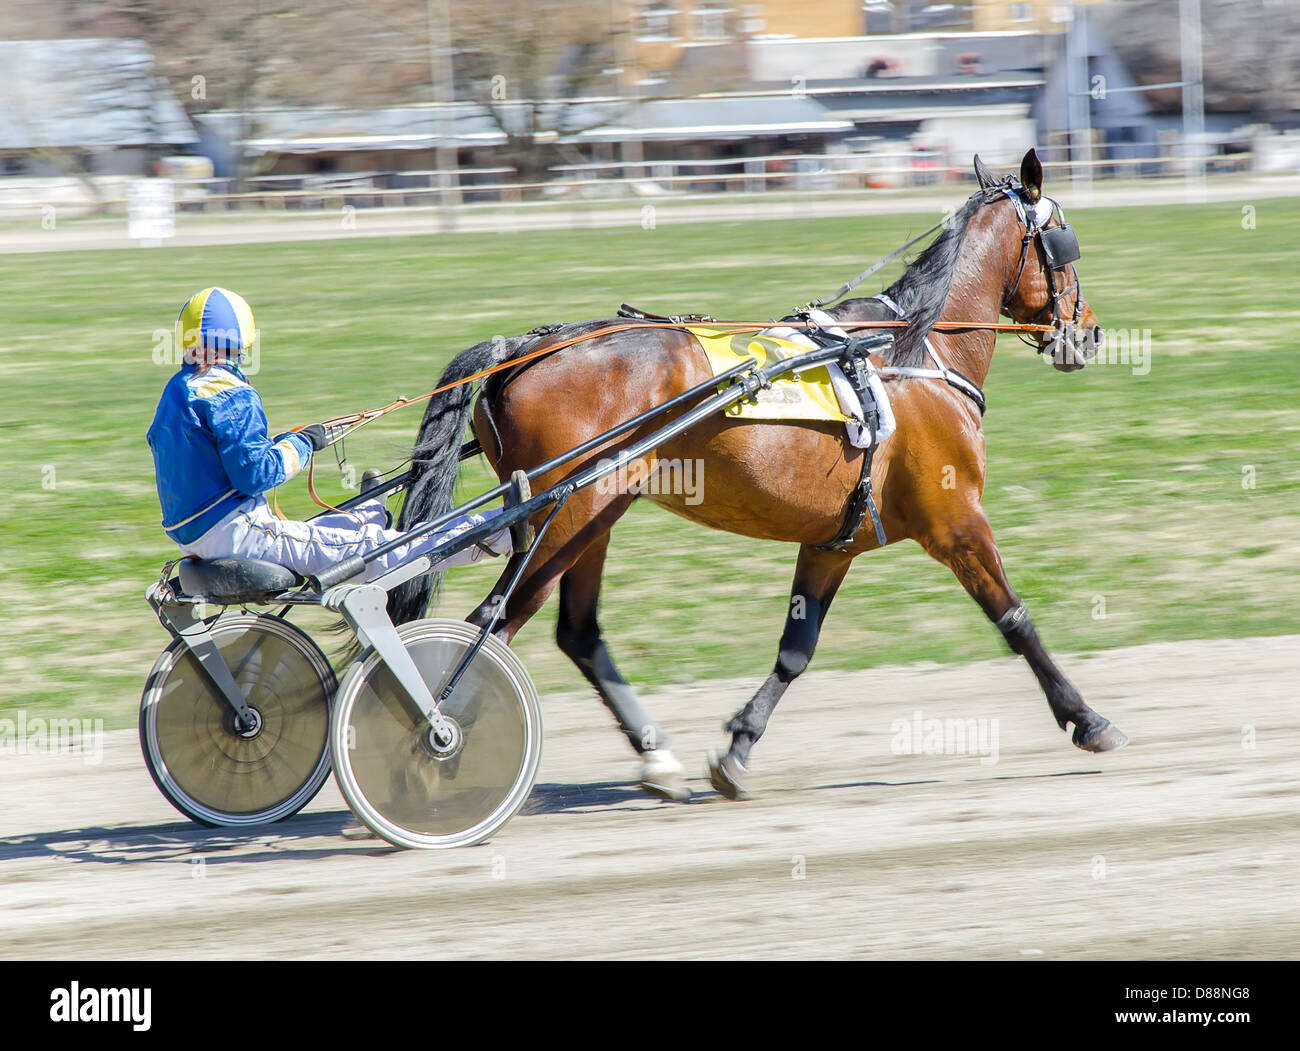 Harness racing. Racing horse harnessed to lightweight strollers. Stock Photo